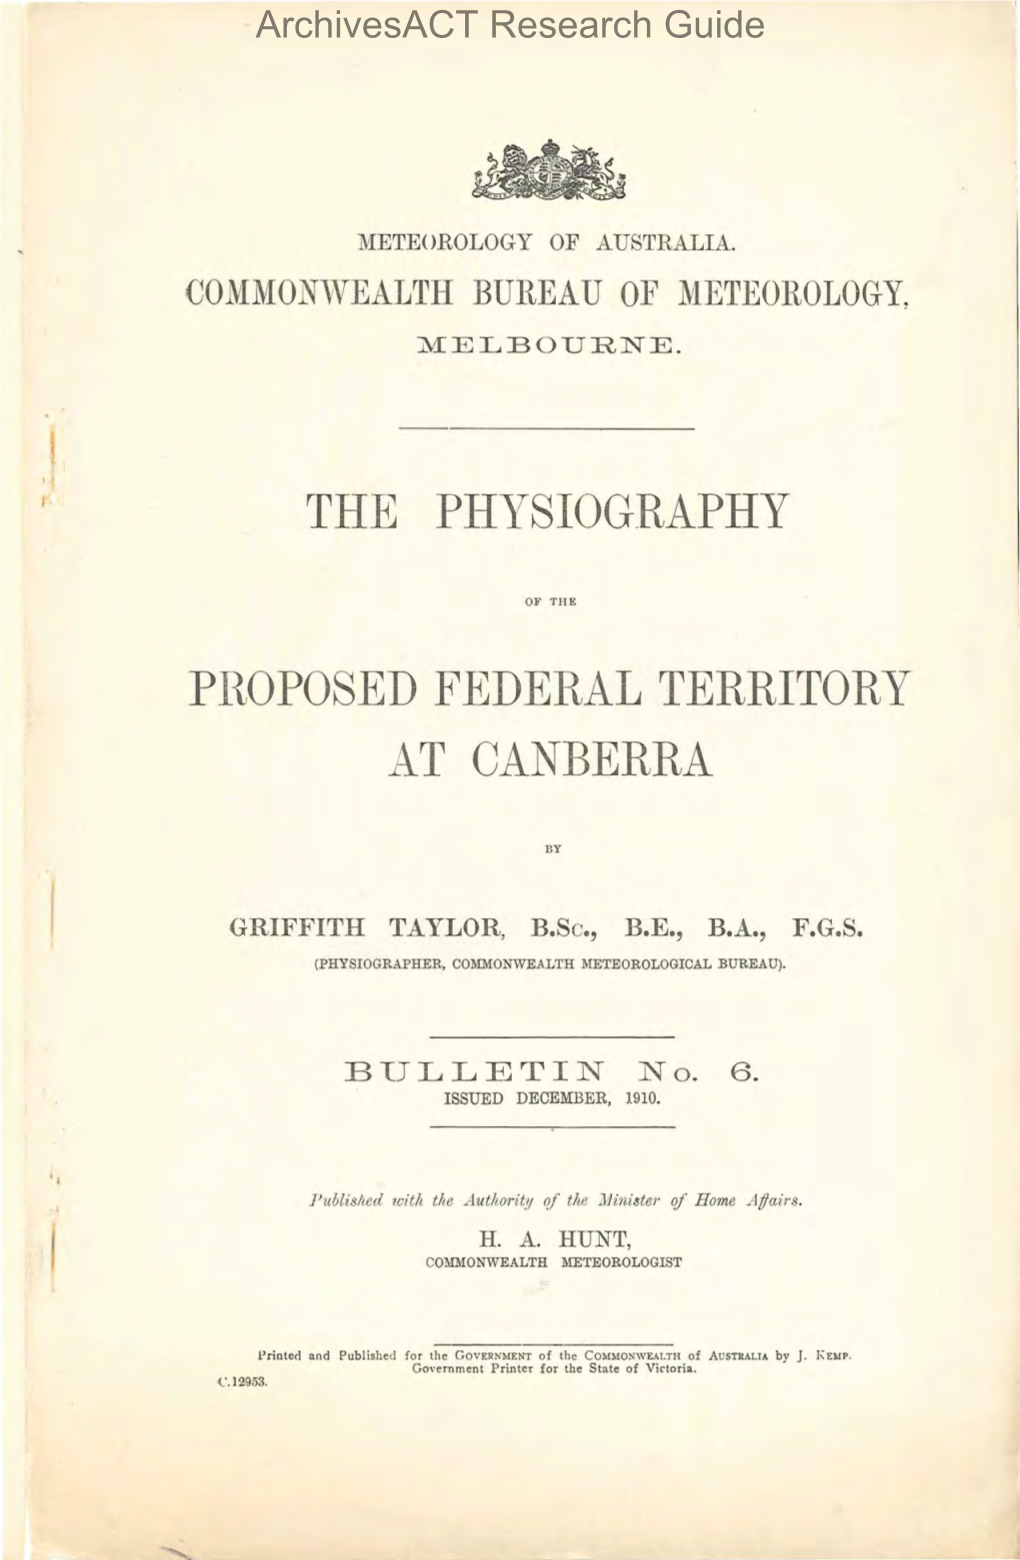 The Physiography of the Proposed Federal Territory at Canberra for Approval for Publication